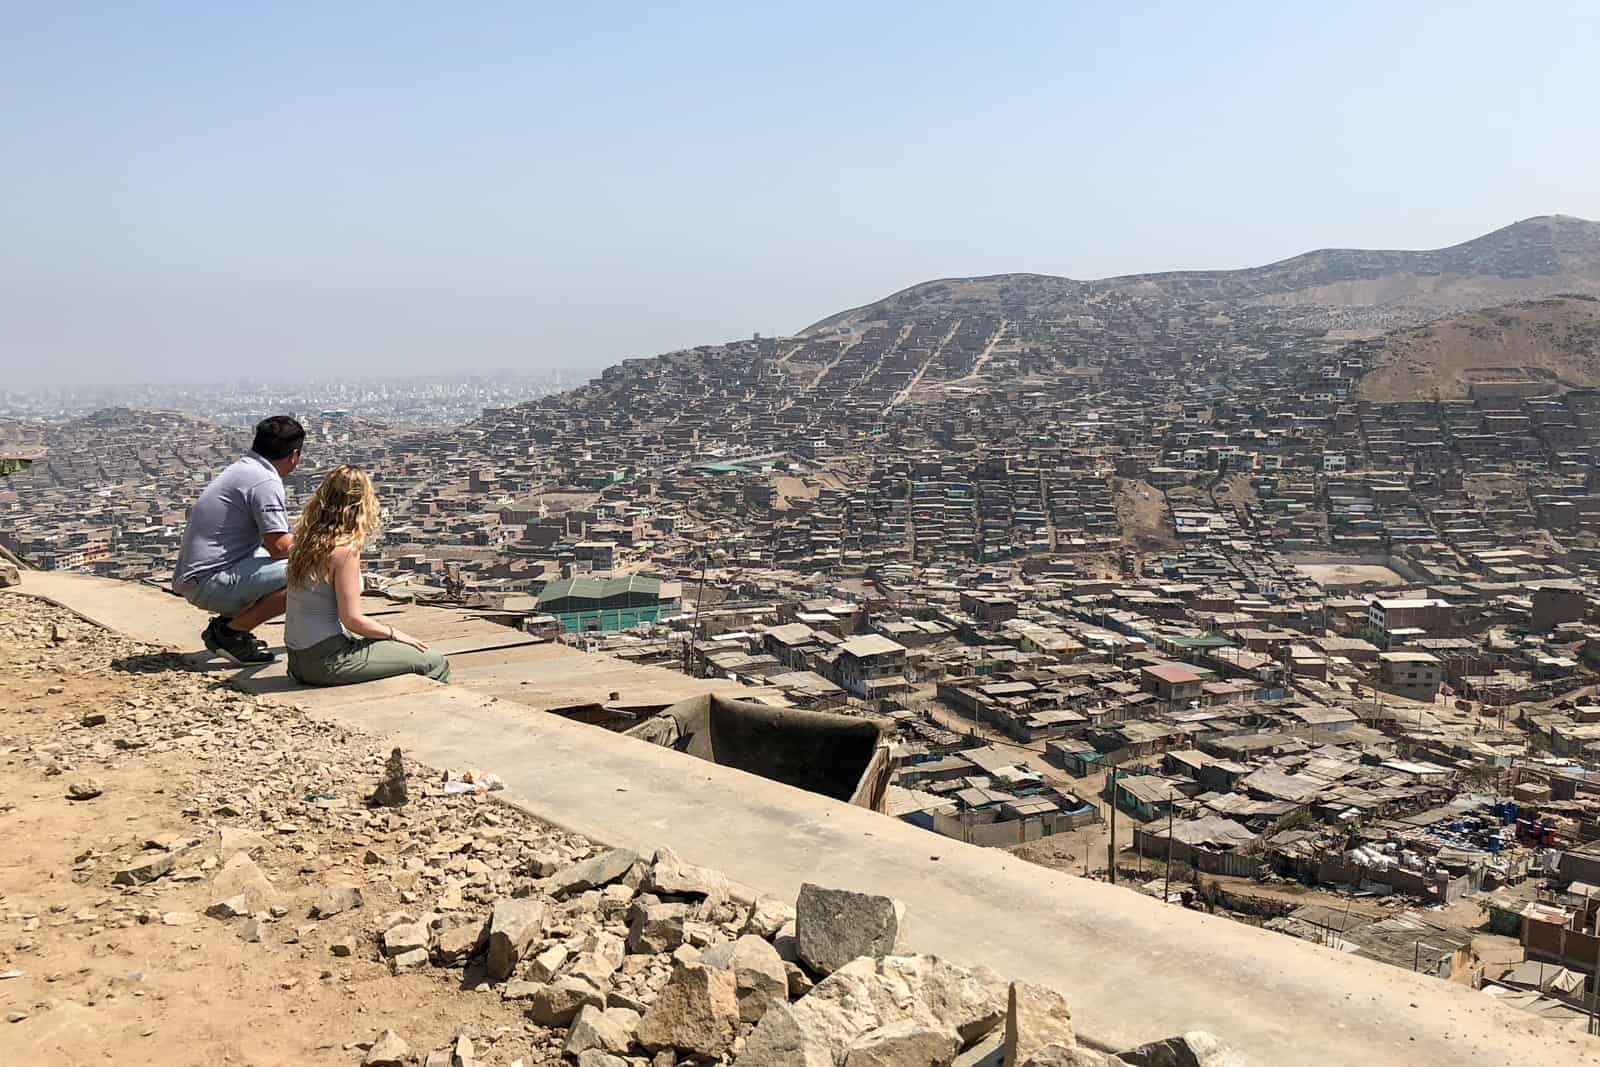 A Peruvian tour guide and a tourist sit at a stone ledge looking out over the San Juan barrio of Lima, Peru.